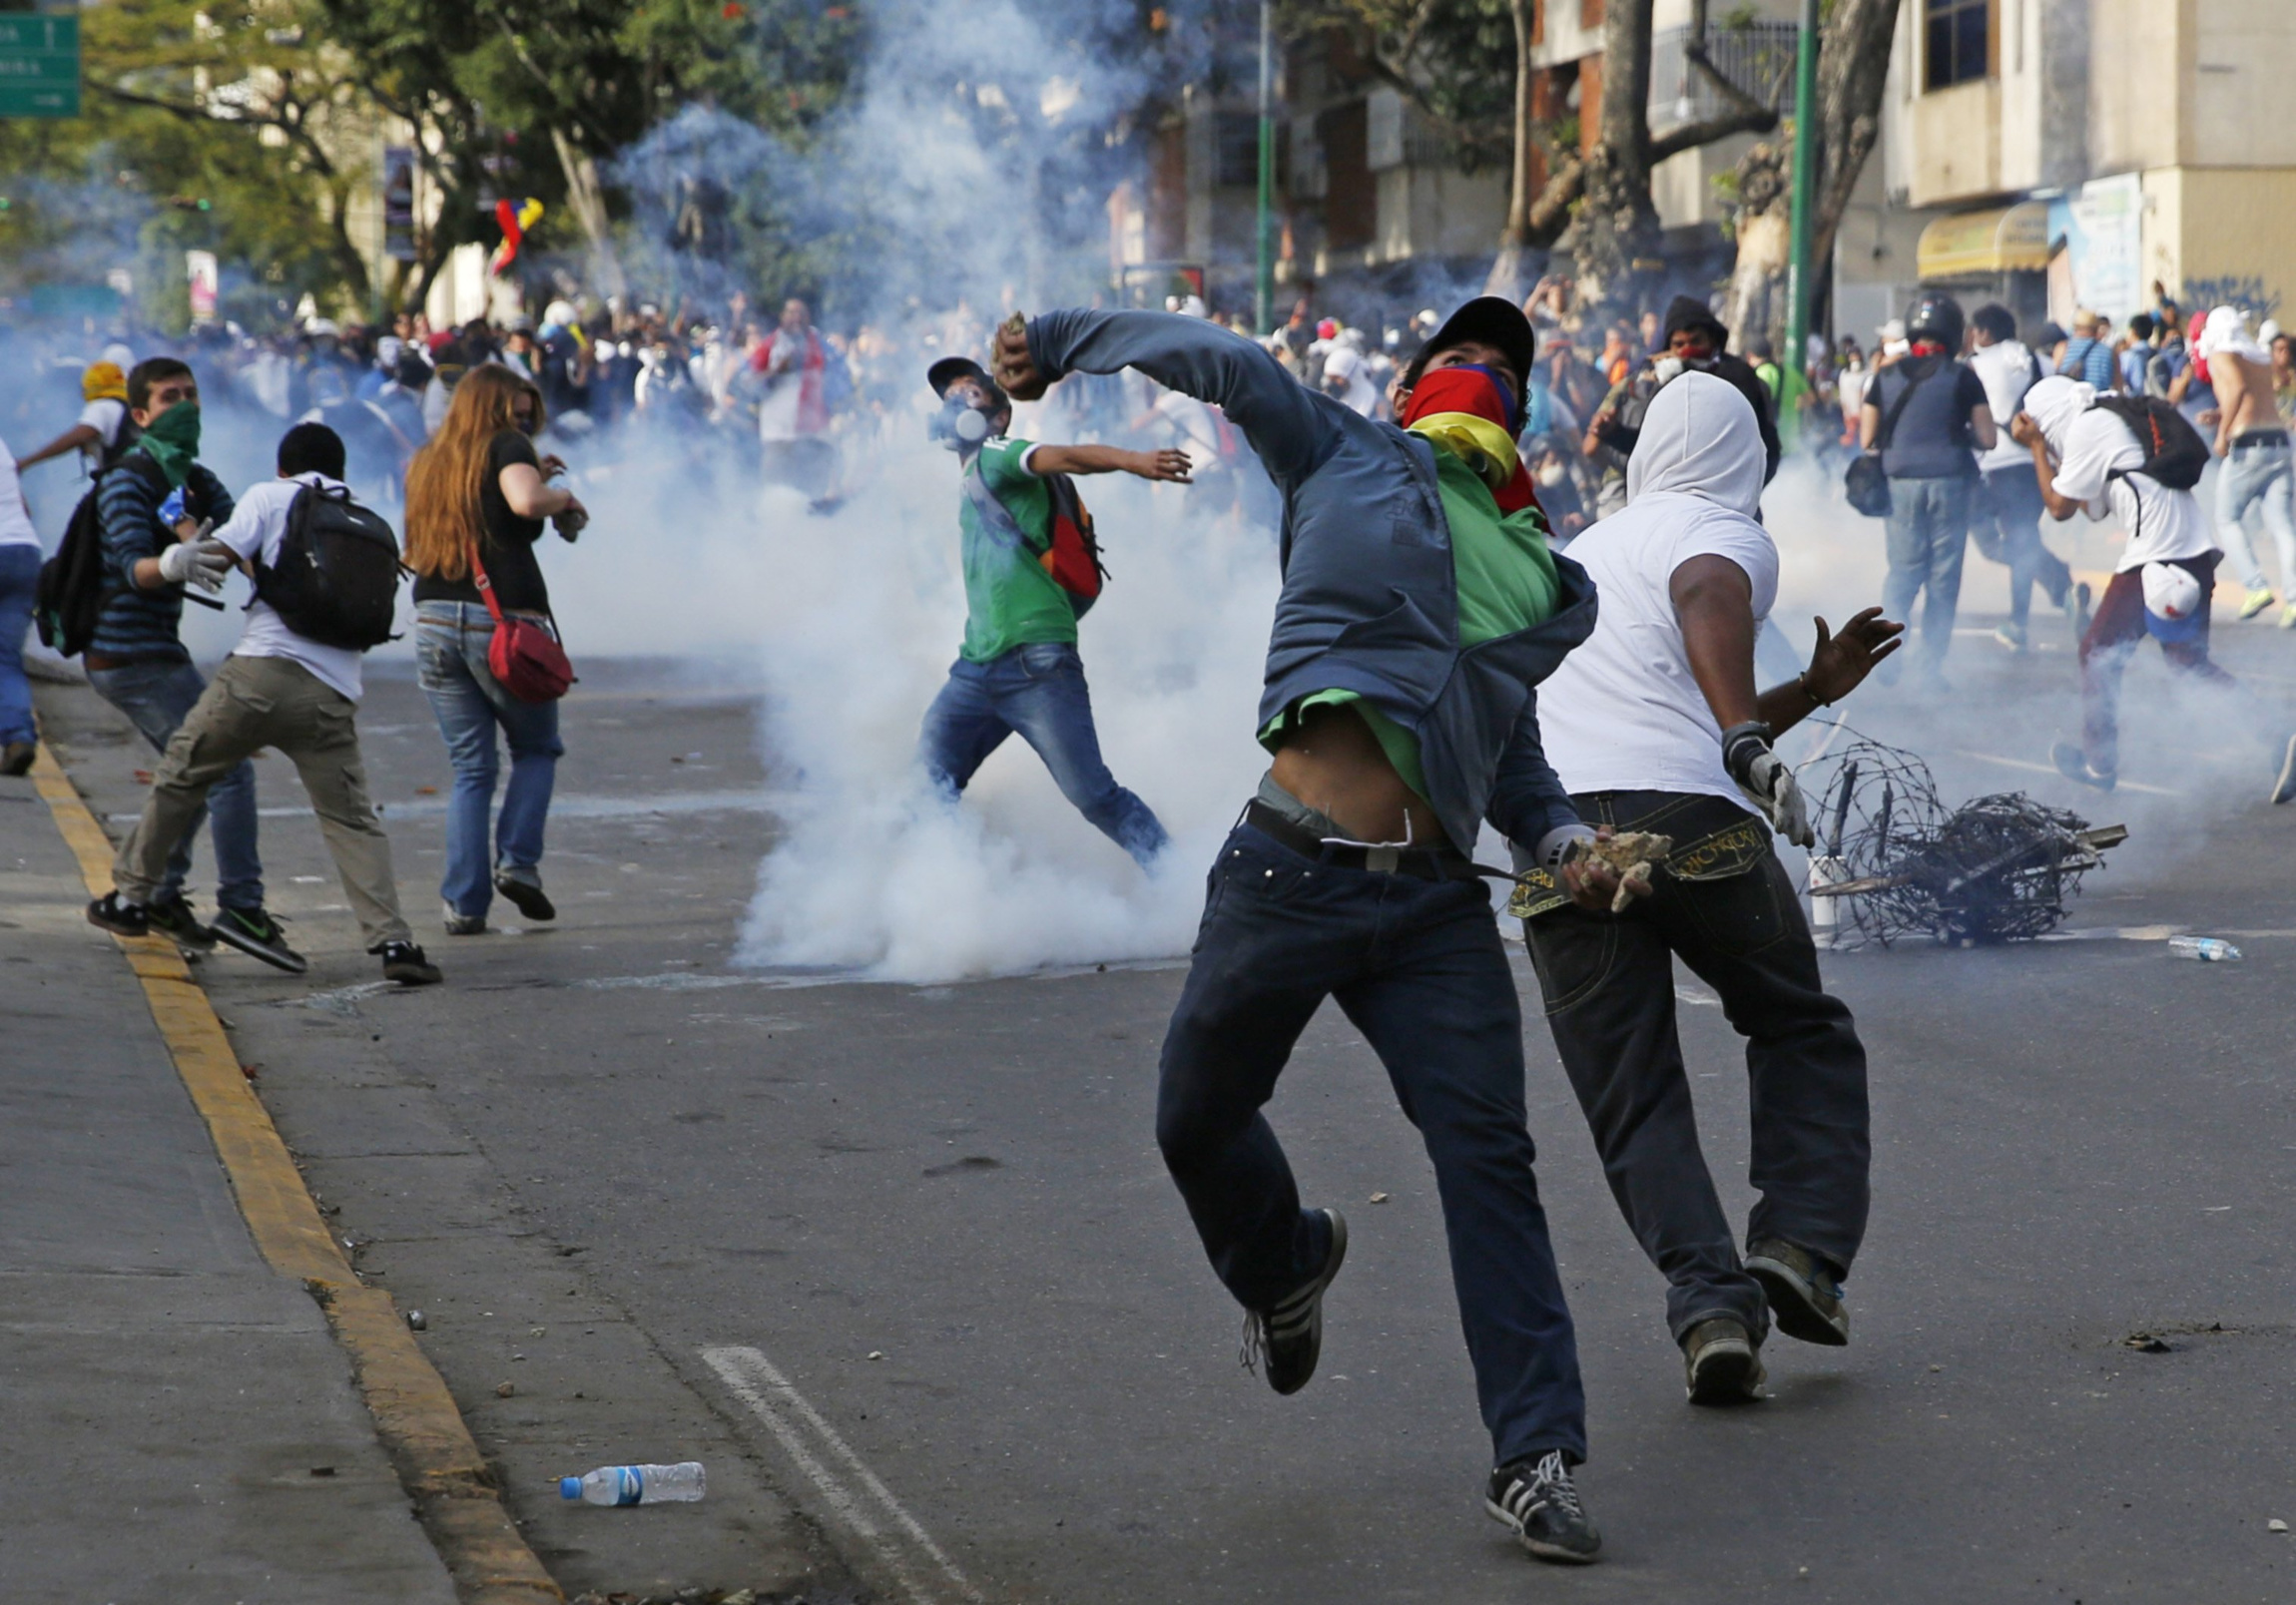 Demonstrators confront police during a protest against the government of President Nicolas Maduro in Caracas, Venezuela, Feb. 22. The country's Catholic leaders urged dialogue and respect for the demonstrators' human rights. (CNS photo/Carlos Garcia Rawl ins, Reuters) (Feb. 25, 2014) 